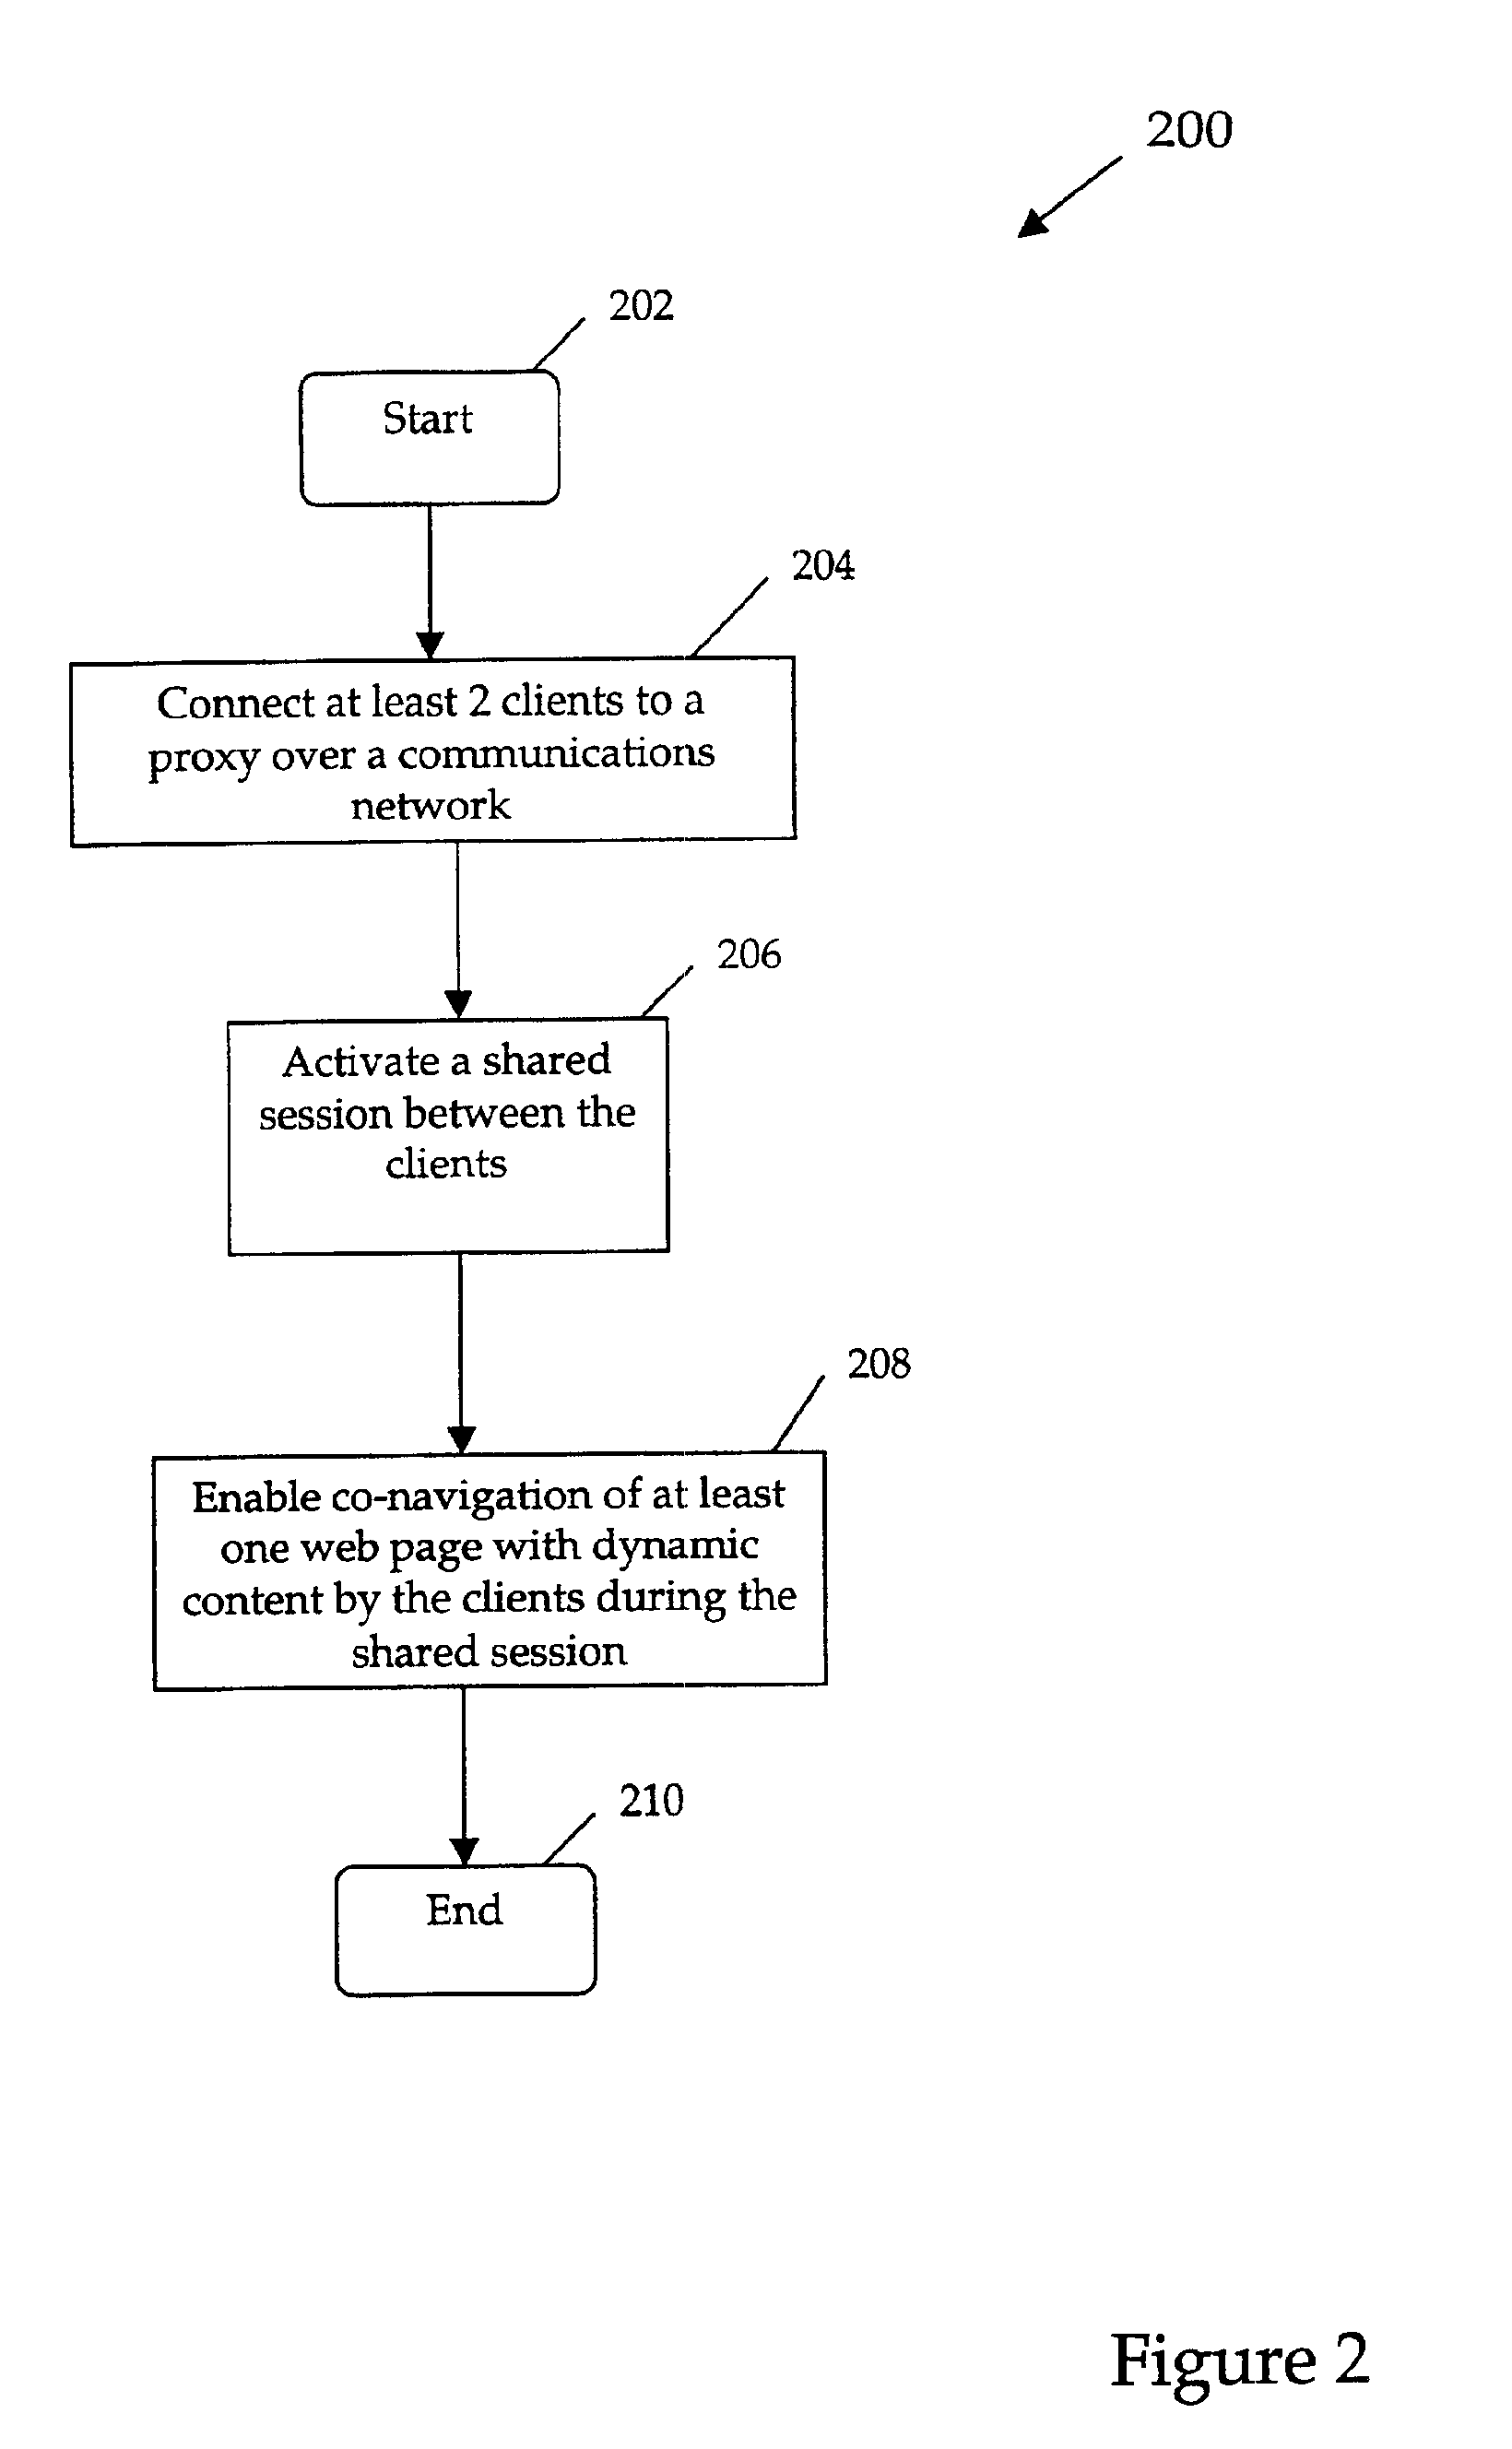 System and method for web co-navigation with dynamic content including incorporation of business rule into web document